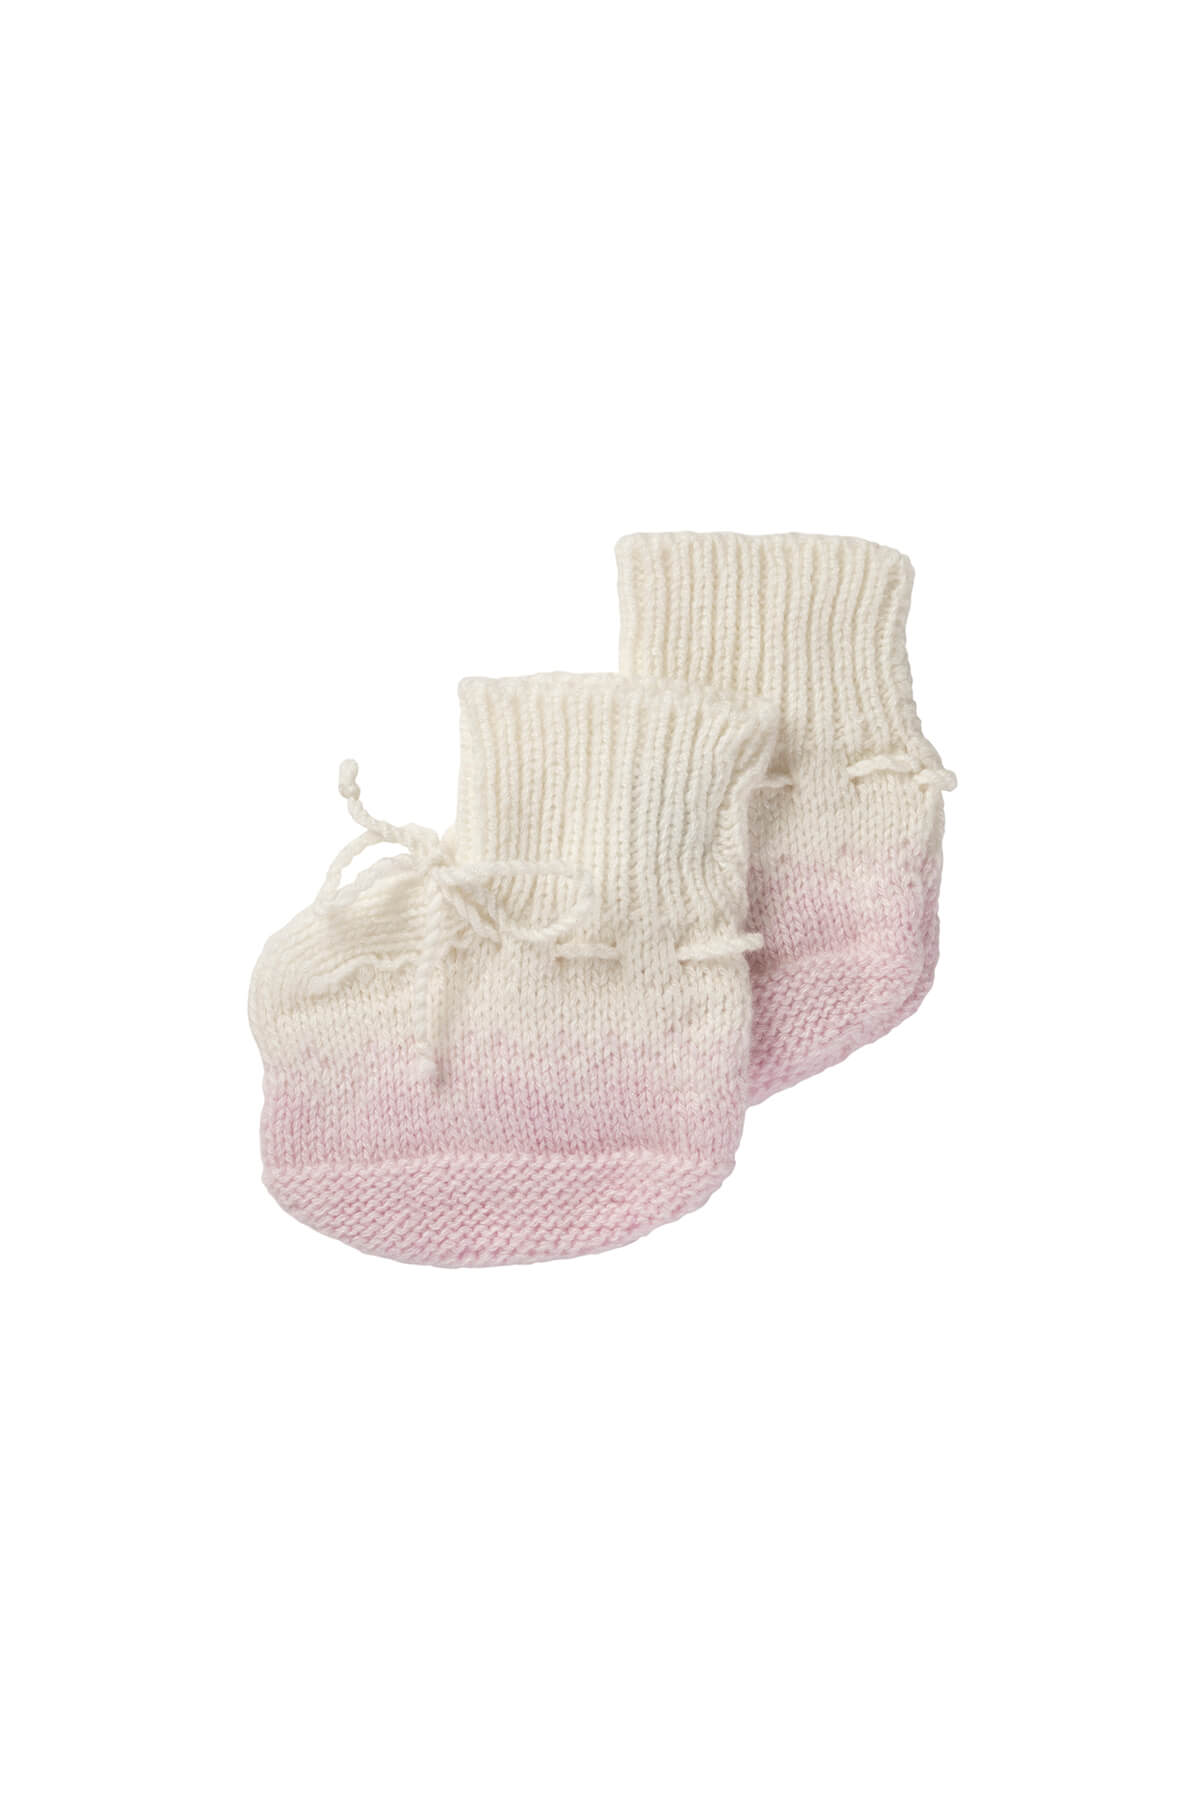 Johnstons of Elgin Hand Knitted Ombre Cashmere Baby Booties in Blush on a white background 76196SE0208